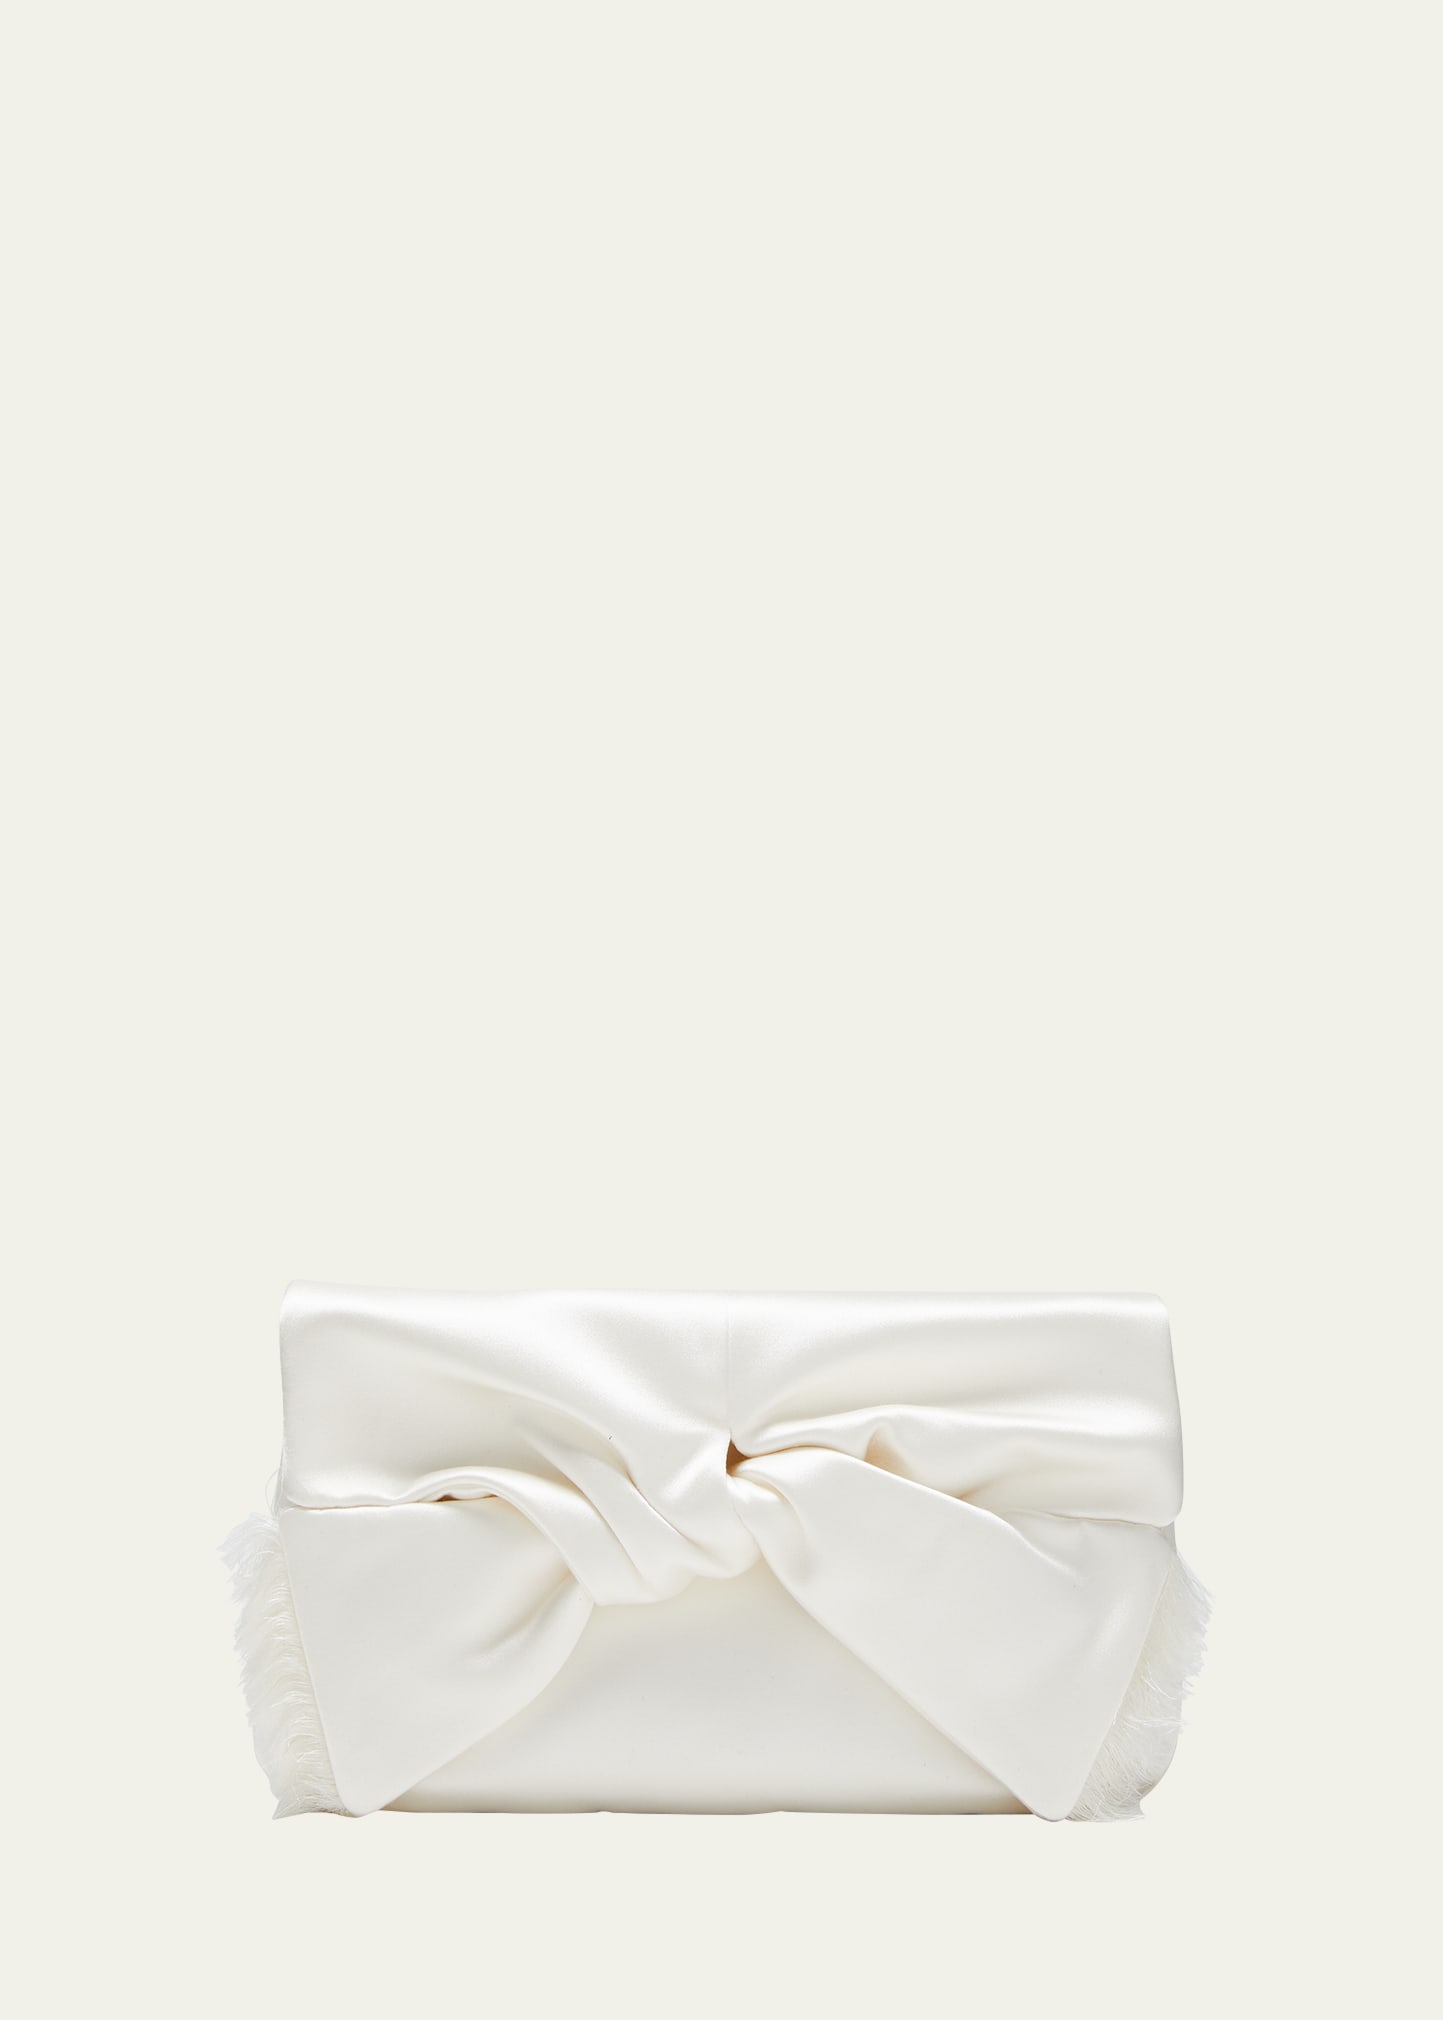 Anya Hindmarch Bow Satin Clutch Bag In Ivory